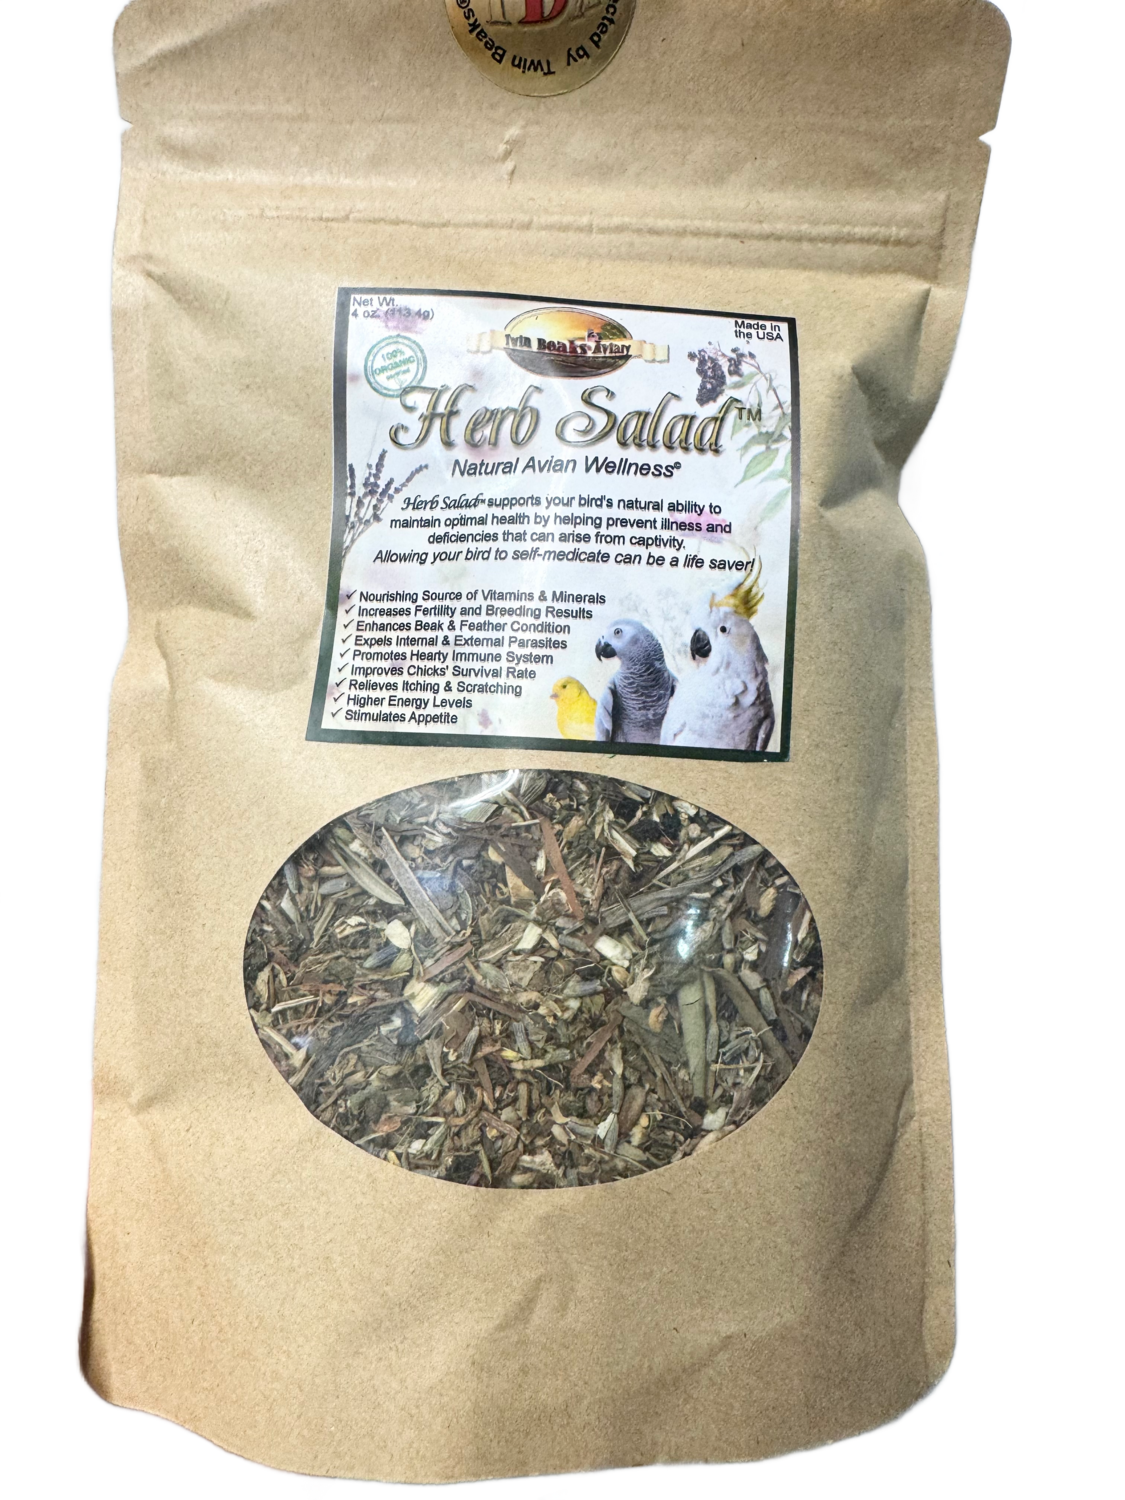 4 oz Herb Salad from Twin Beaks Aviary (USDA Organic). Herb Salad's™ 100% Organic ingredients are the leaves, roots, bark and flowers of the plants that animals in the wild seek